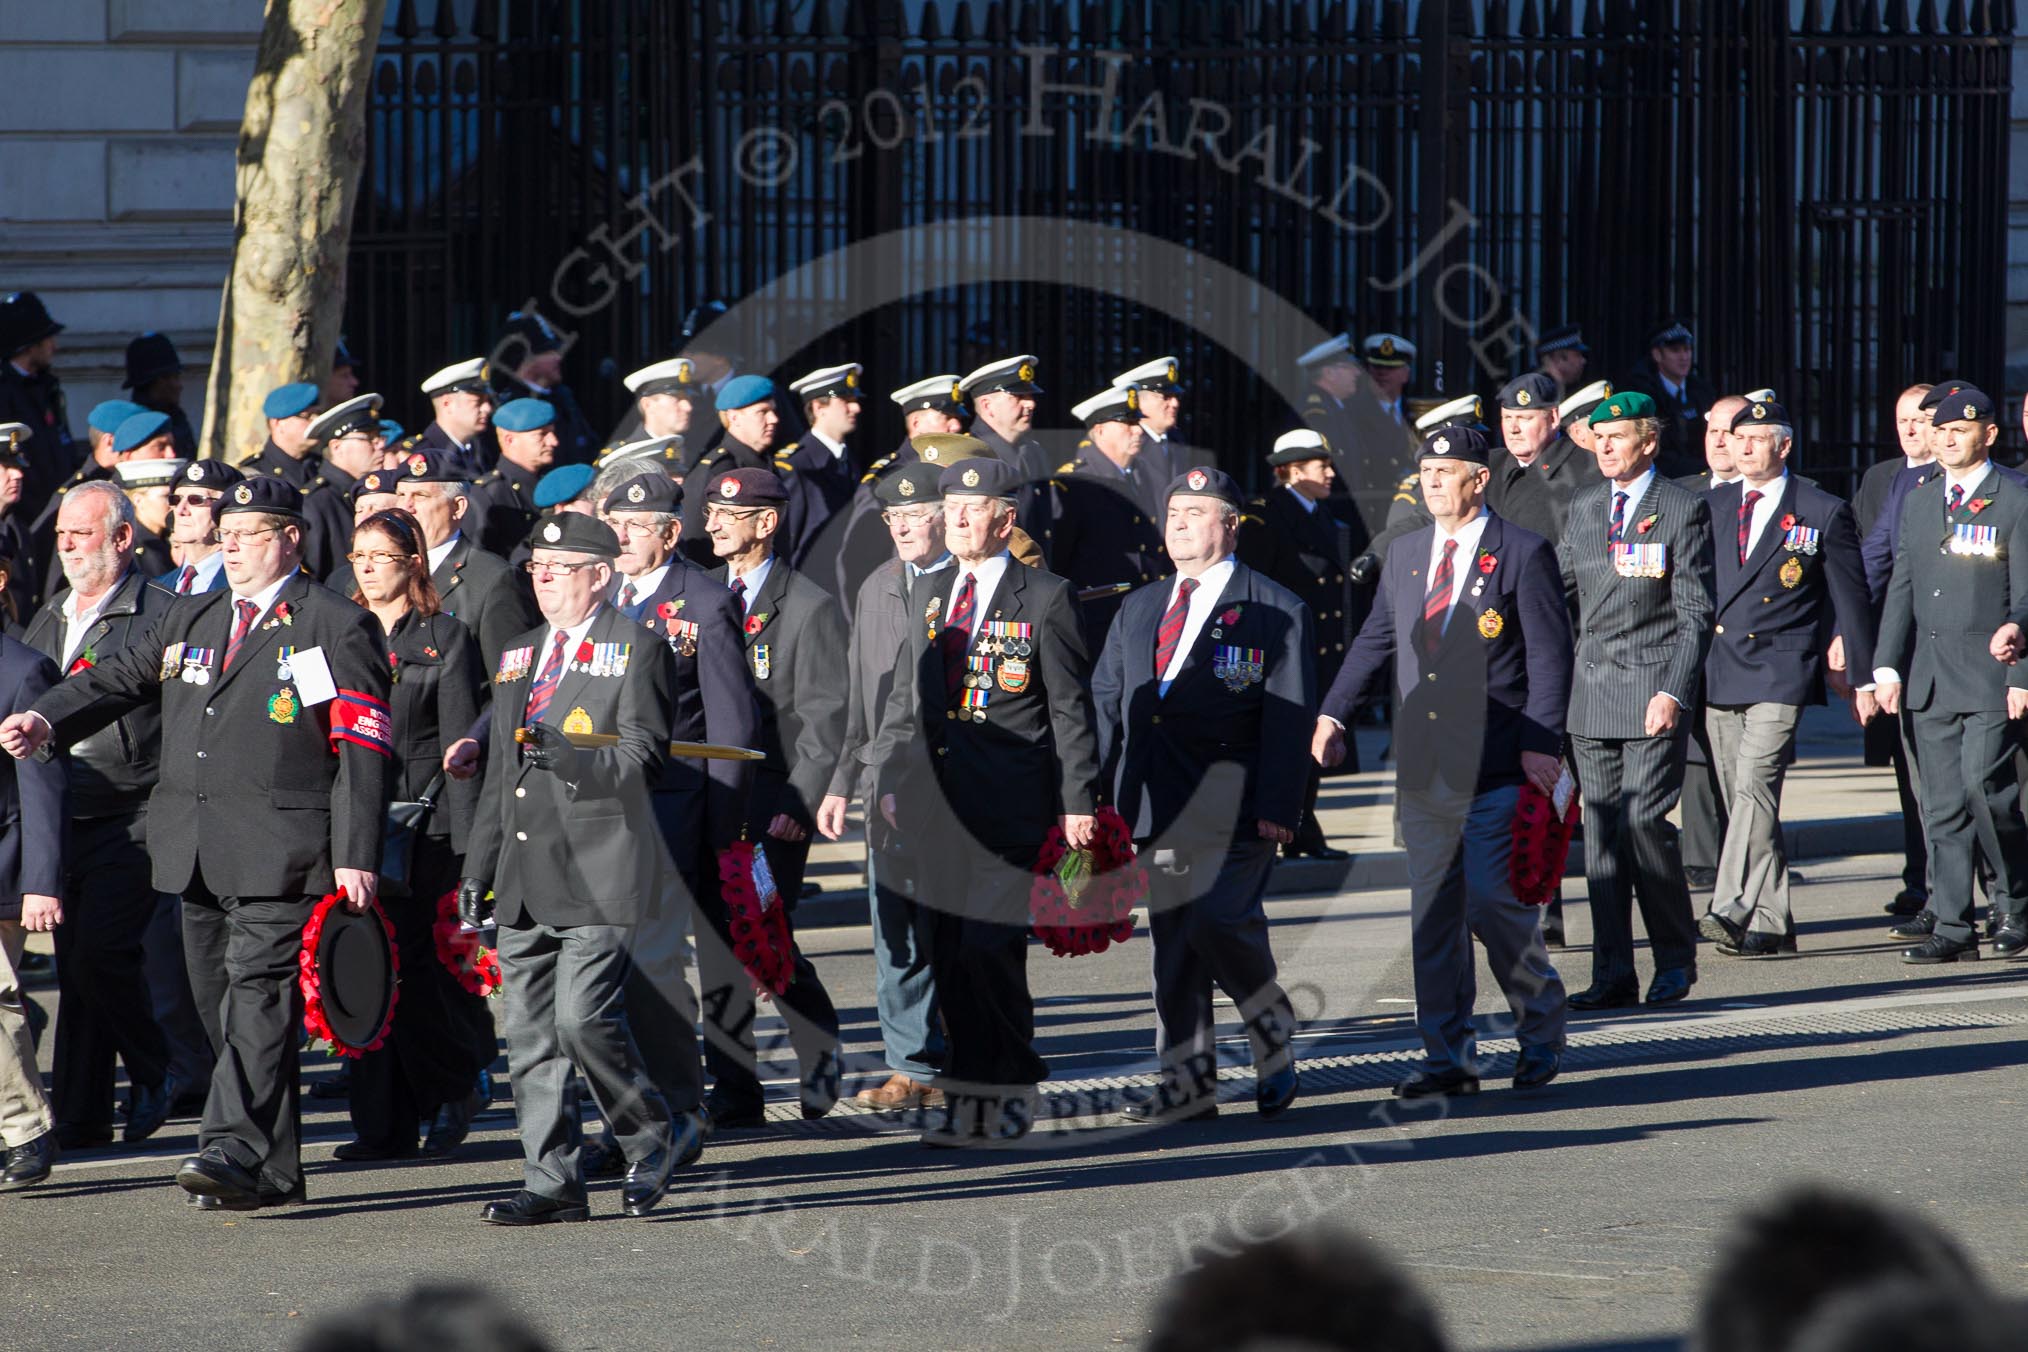 Remembrance Sunday 2012 Cenotaph March Past: Group B26 - Royal Engineers Association and B27 - Royal Engineers Bomb Disposal Association..
Whitehall, Cenotaph,
London SW1,

United Kingdom,
on 11 November 2012 at 11:58, image #977